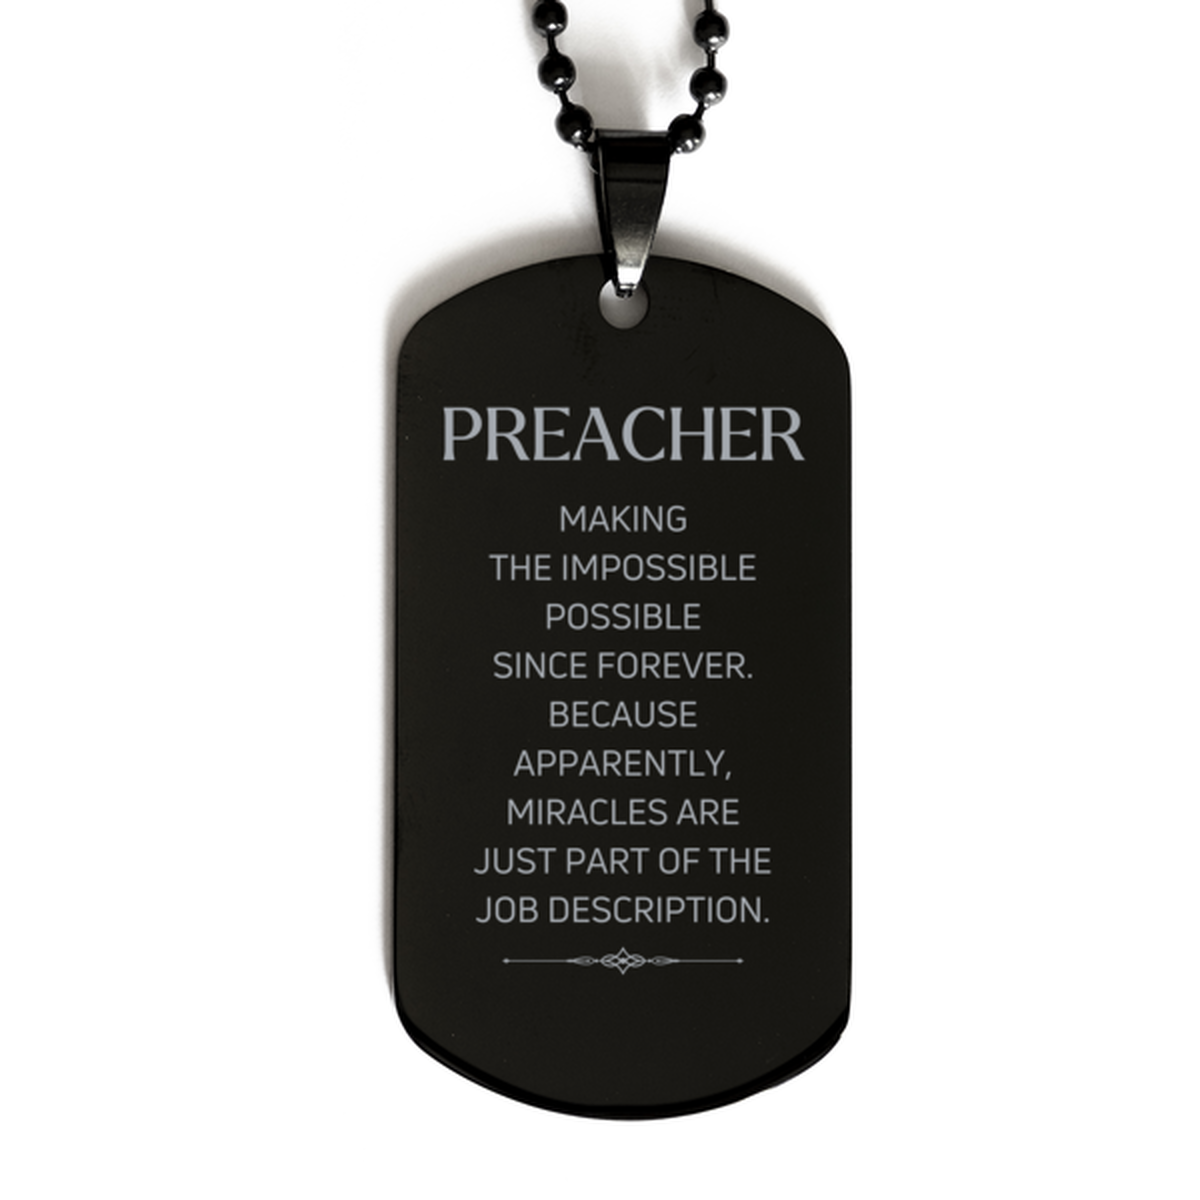 Funny Preacher Gifts, Miracles are just part of the job description, Inspirational Birthday Black Dog Tag For Preacher, Men, Women, Coworkers, Friends, Boss